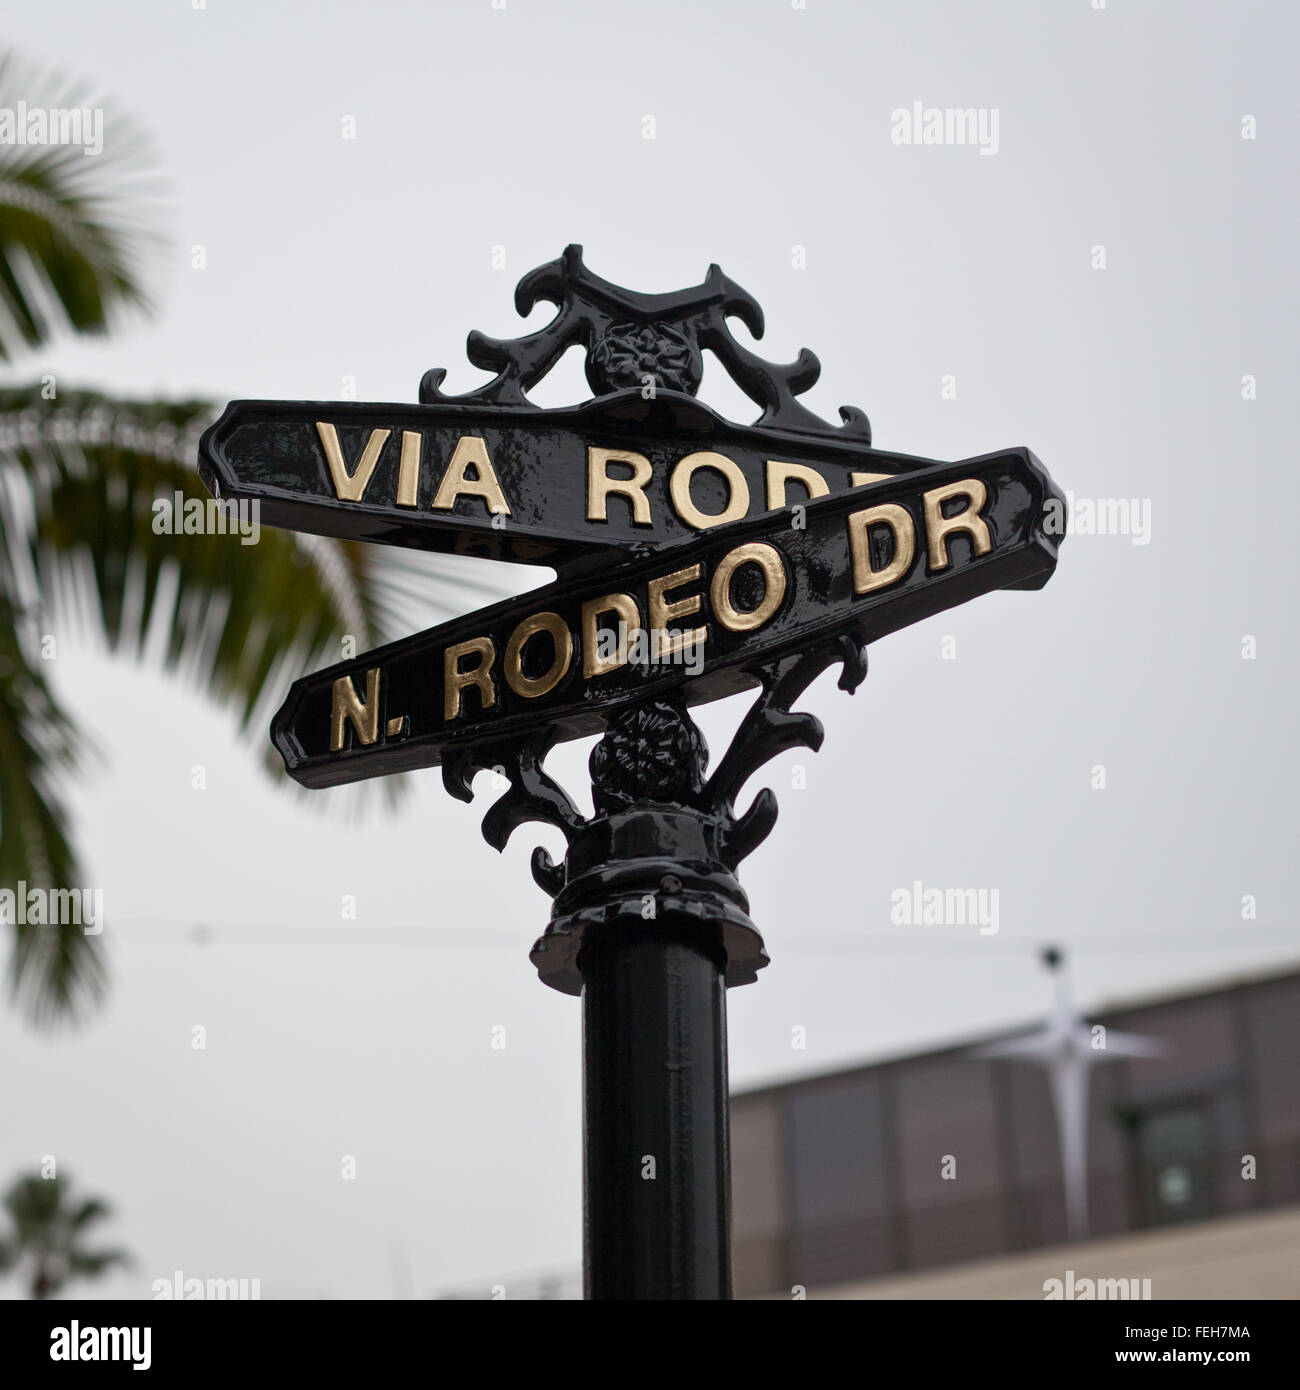 Rodeo Drive Sign in Beverly Hills California Stock Photo - Image of  beverly, close: 40782262